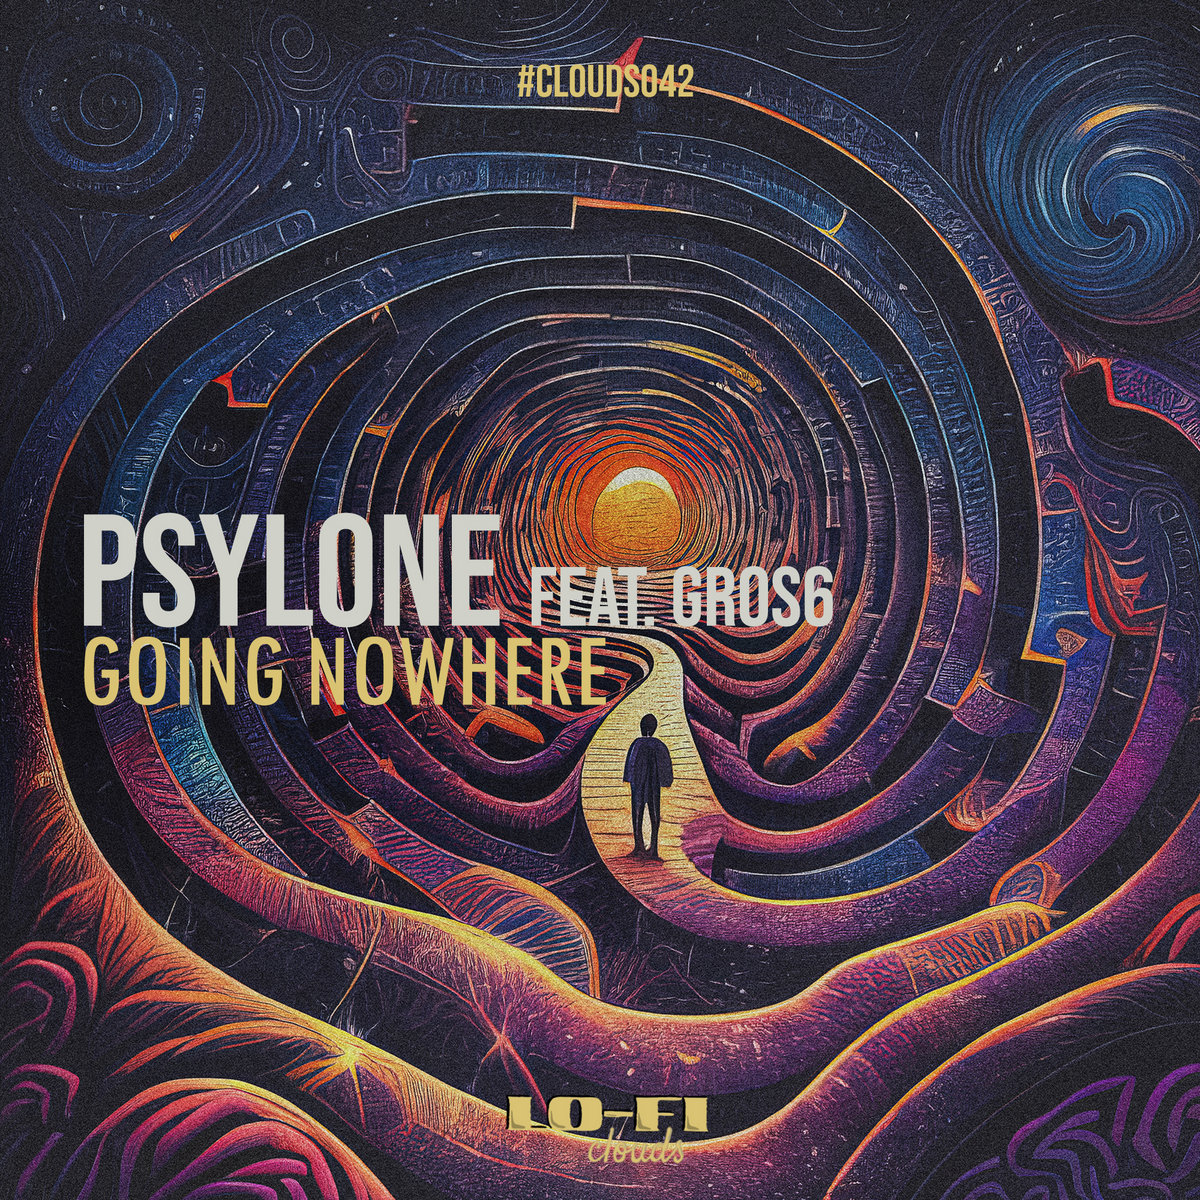 Psylone ft. Gros6 - Going Nowehere (CLOUDS042)